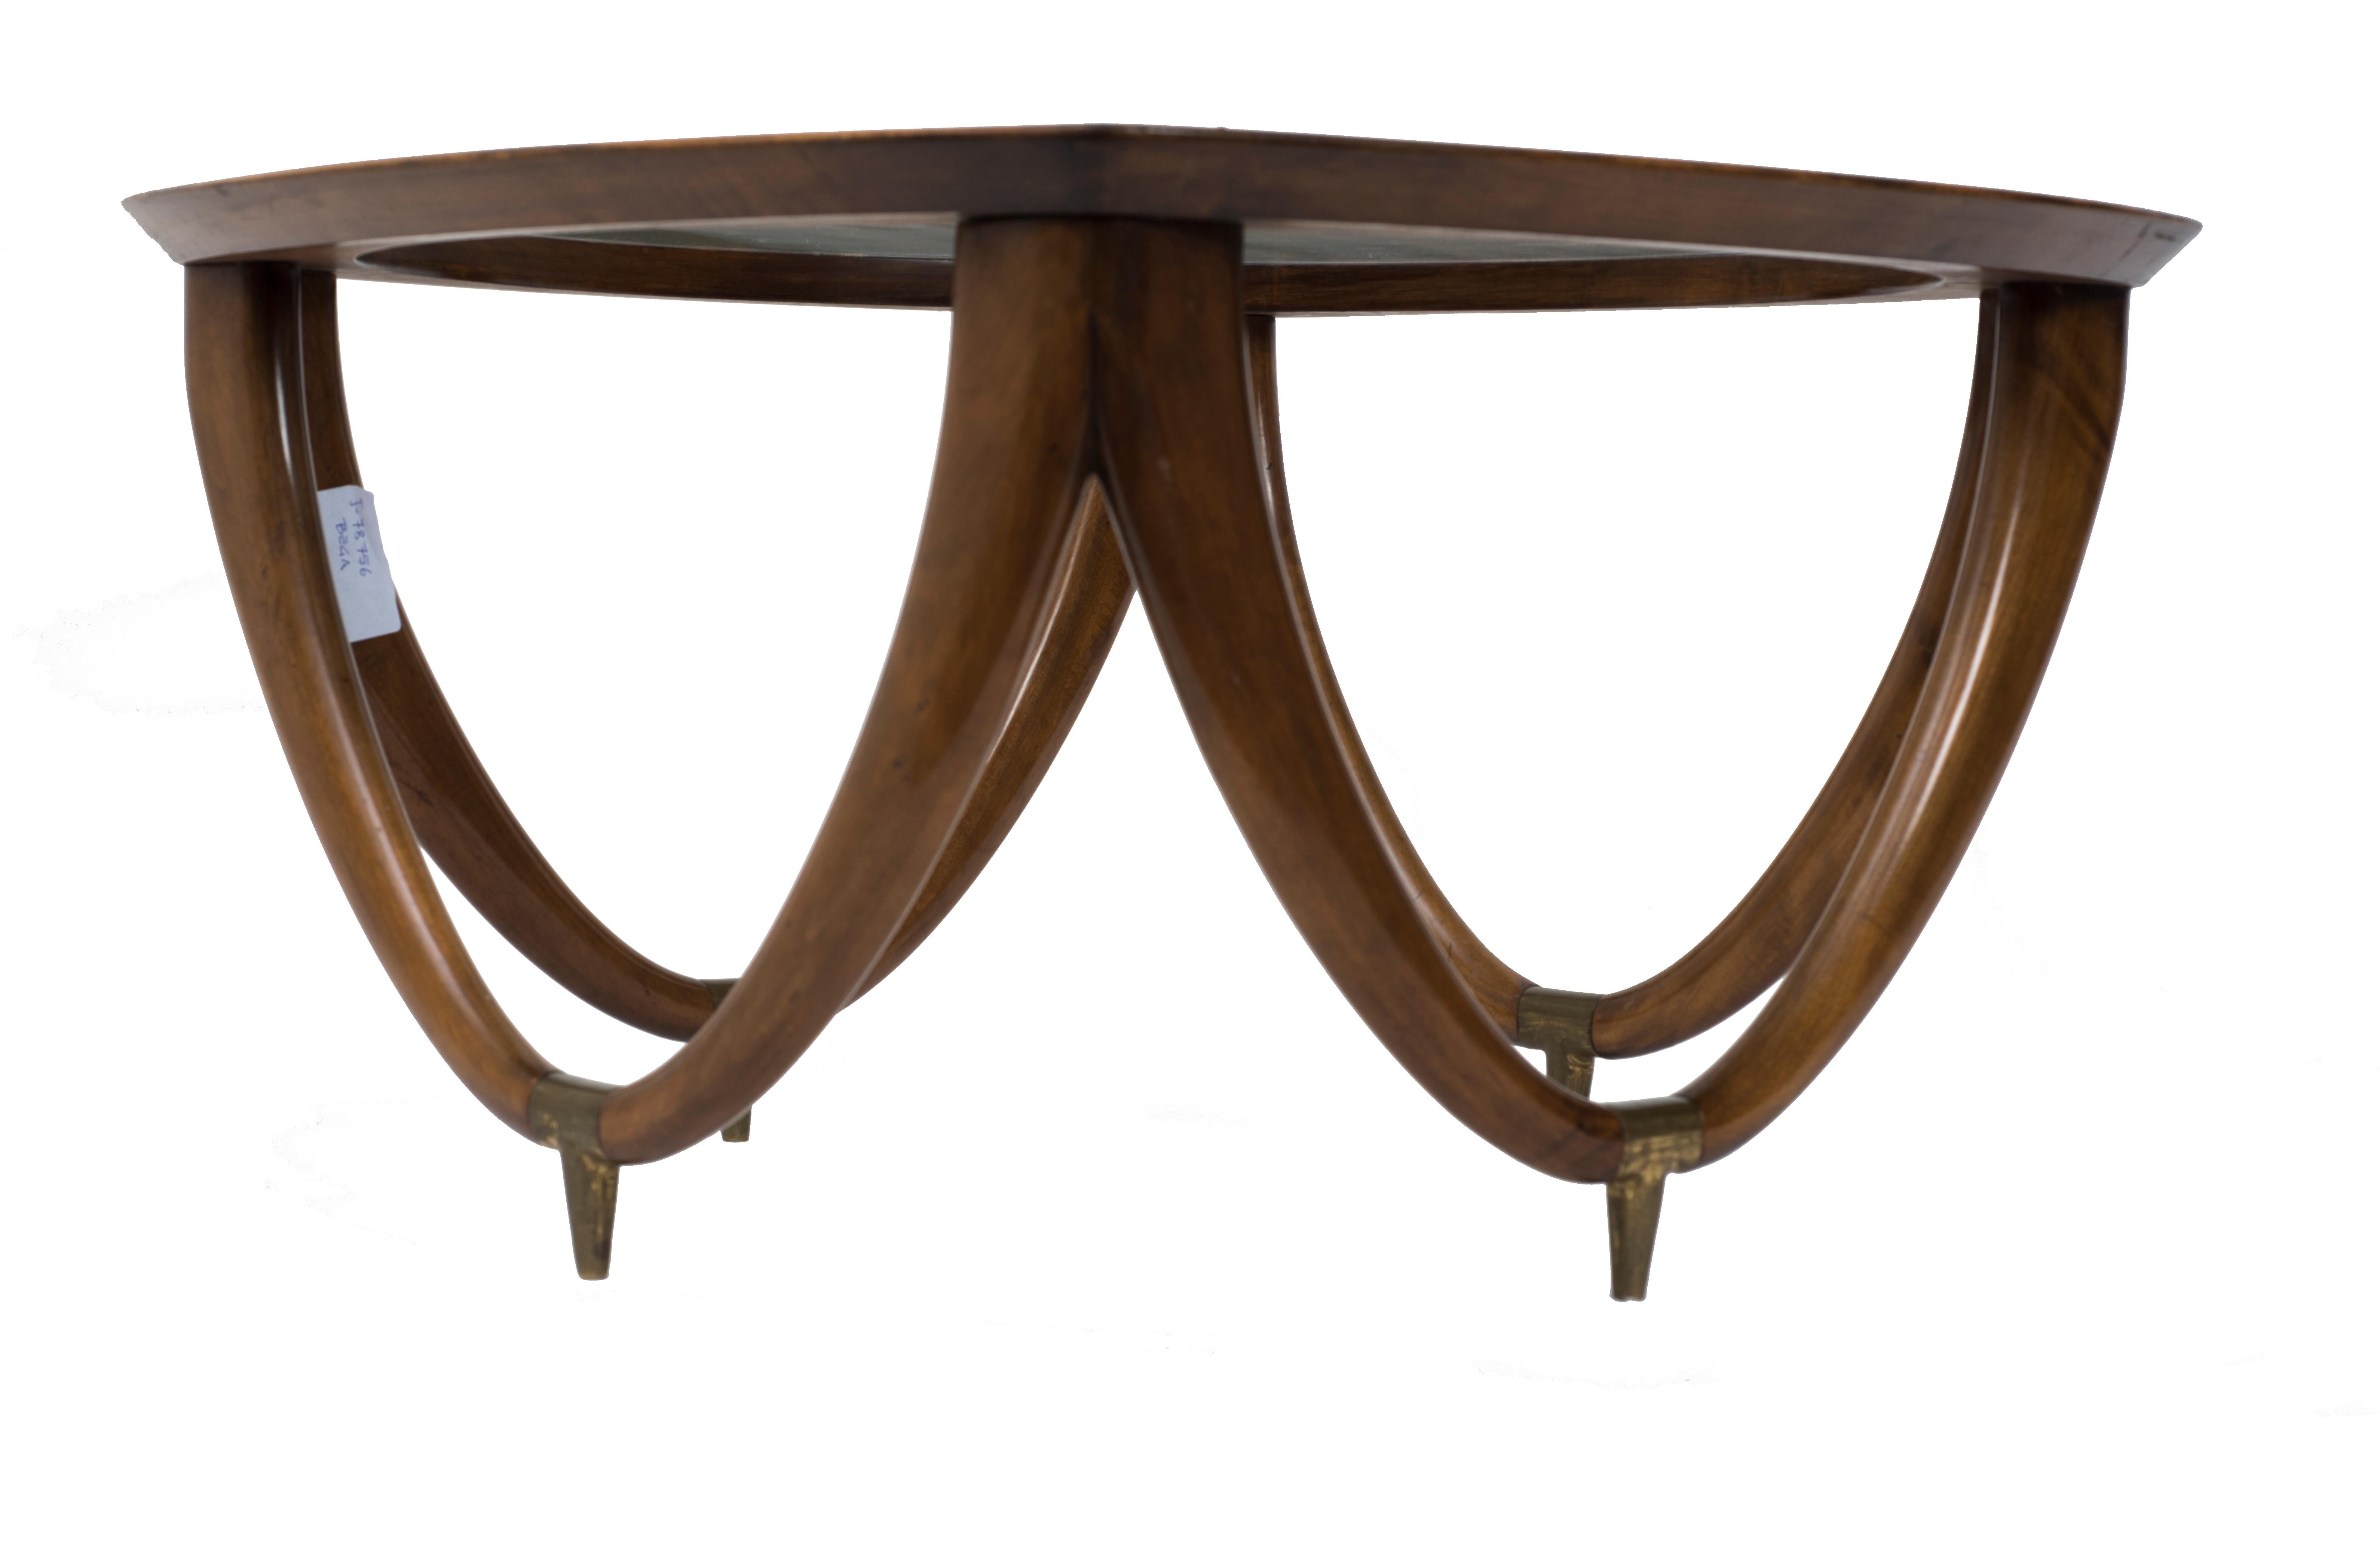 Mid-20th Century Vintage Coffee Table by Melchiorre Bega, Italian Production, circa 1950